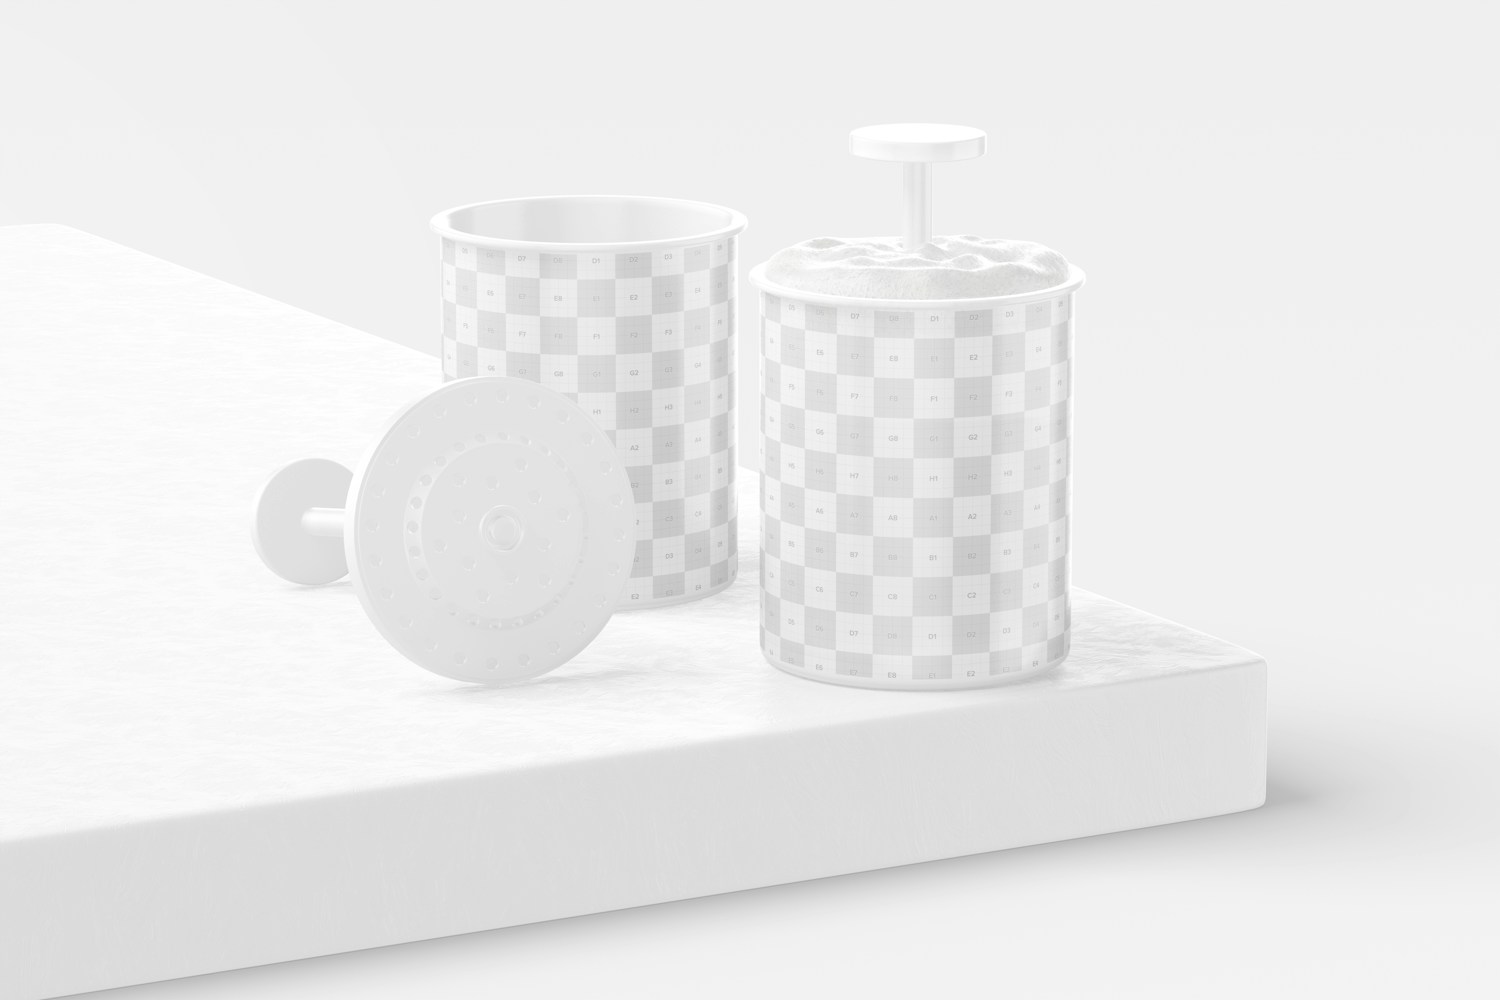 Foam Maker Cups Mockup, Opened and Closed